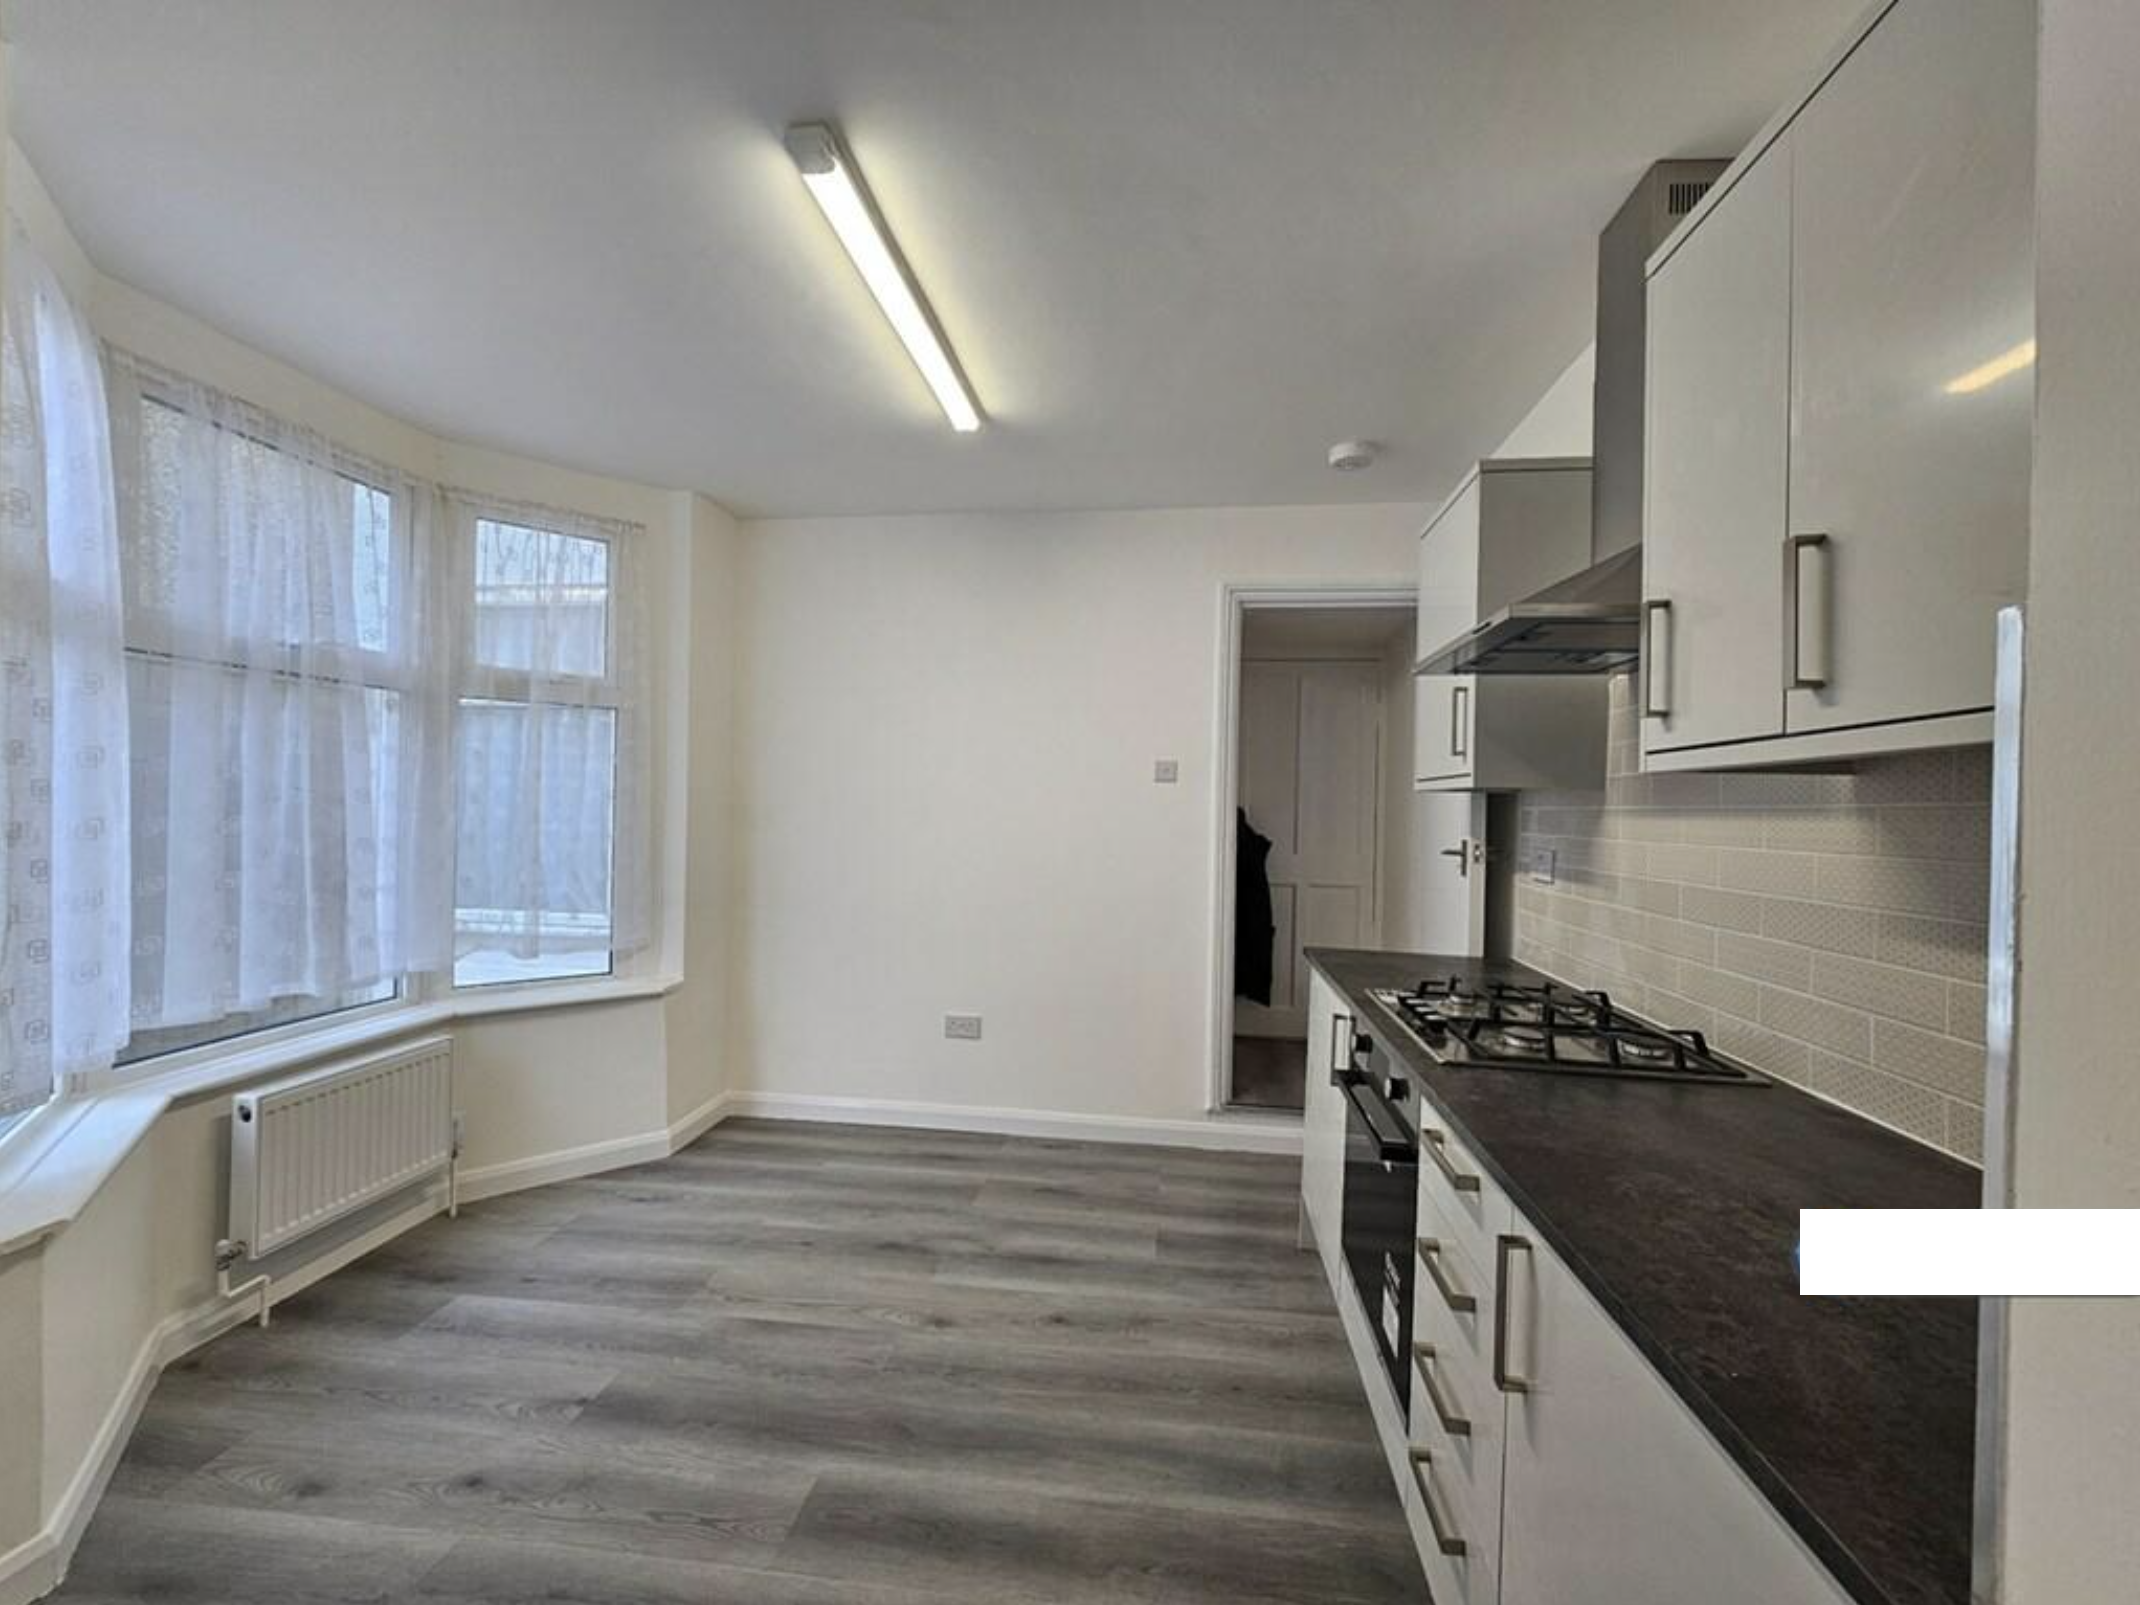 4 bed End of terrace house for rent in Grays. From PropertyLoop